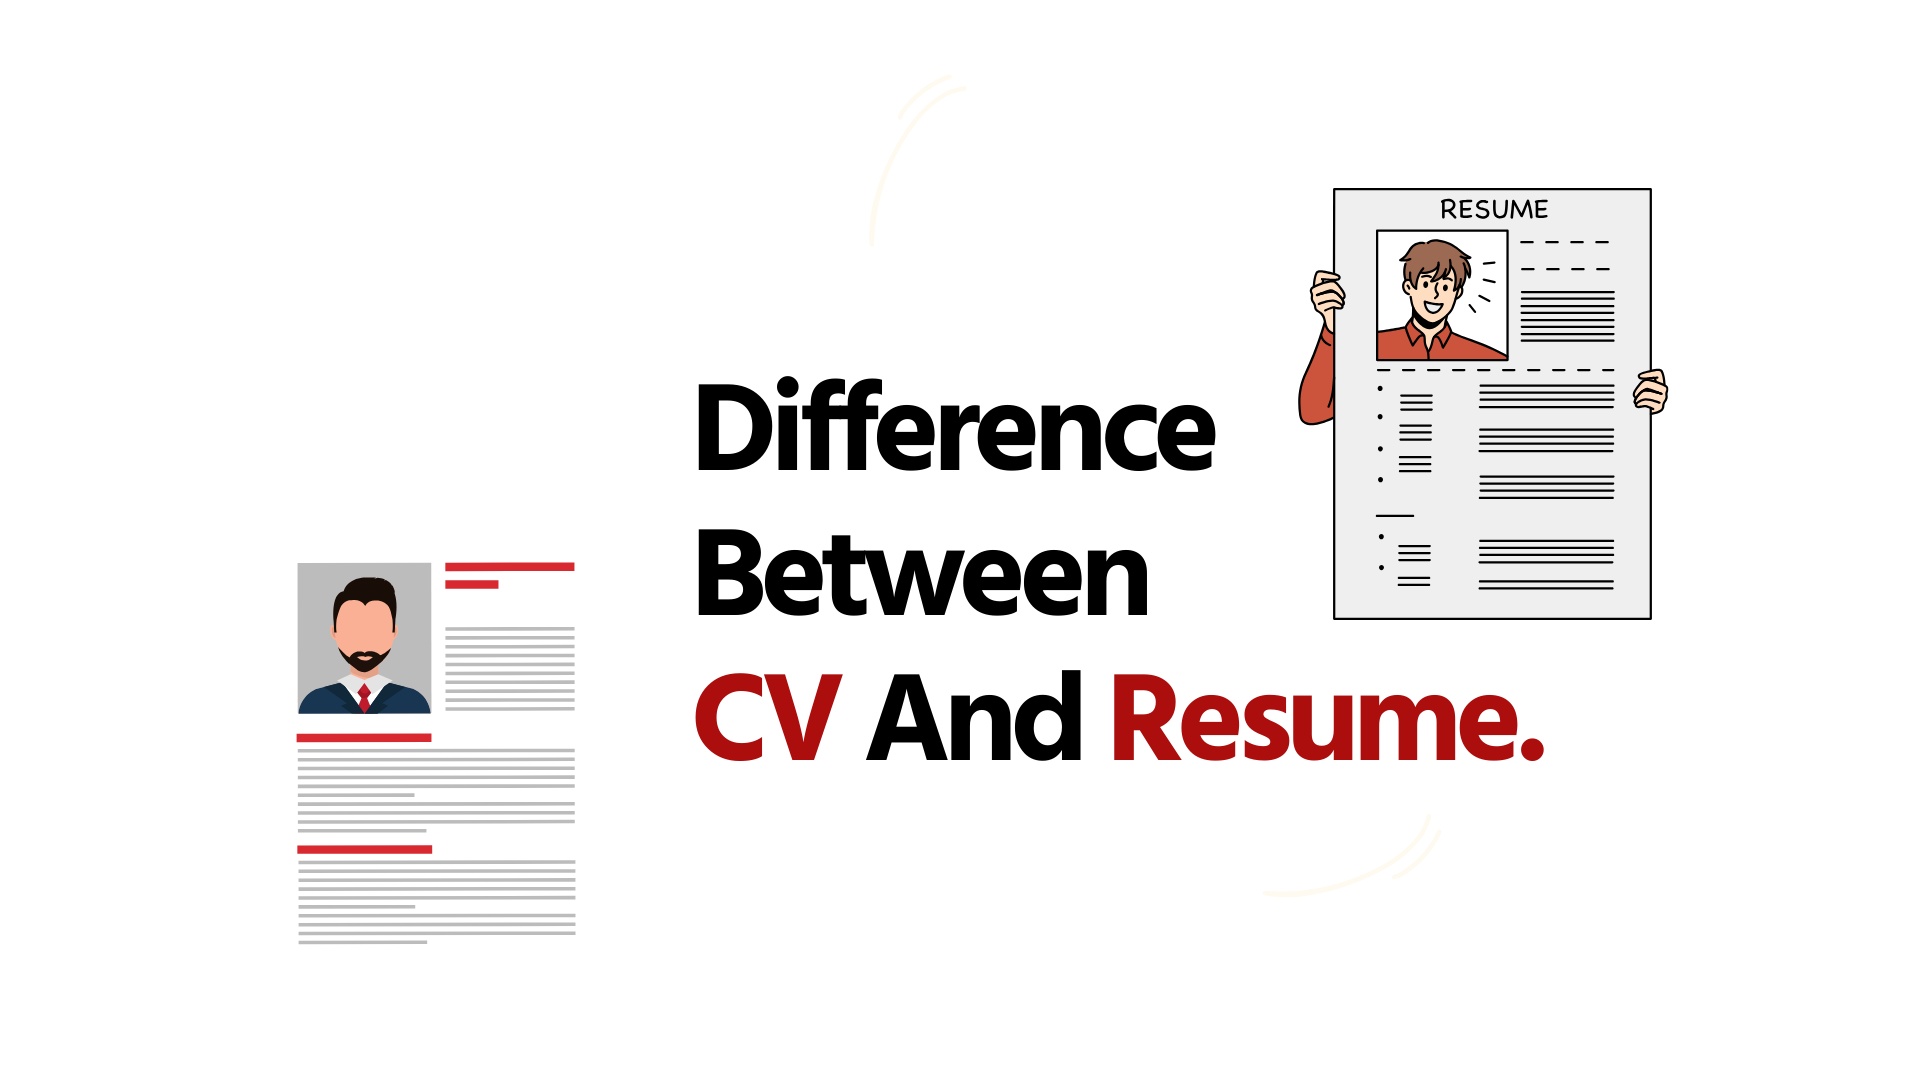 Difference Between CV And Resume